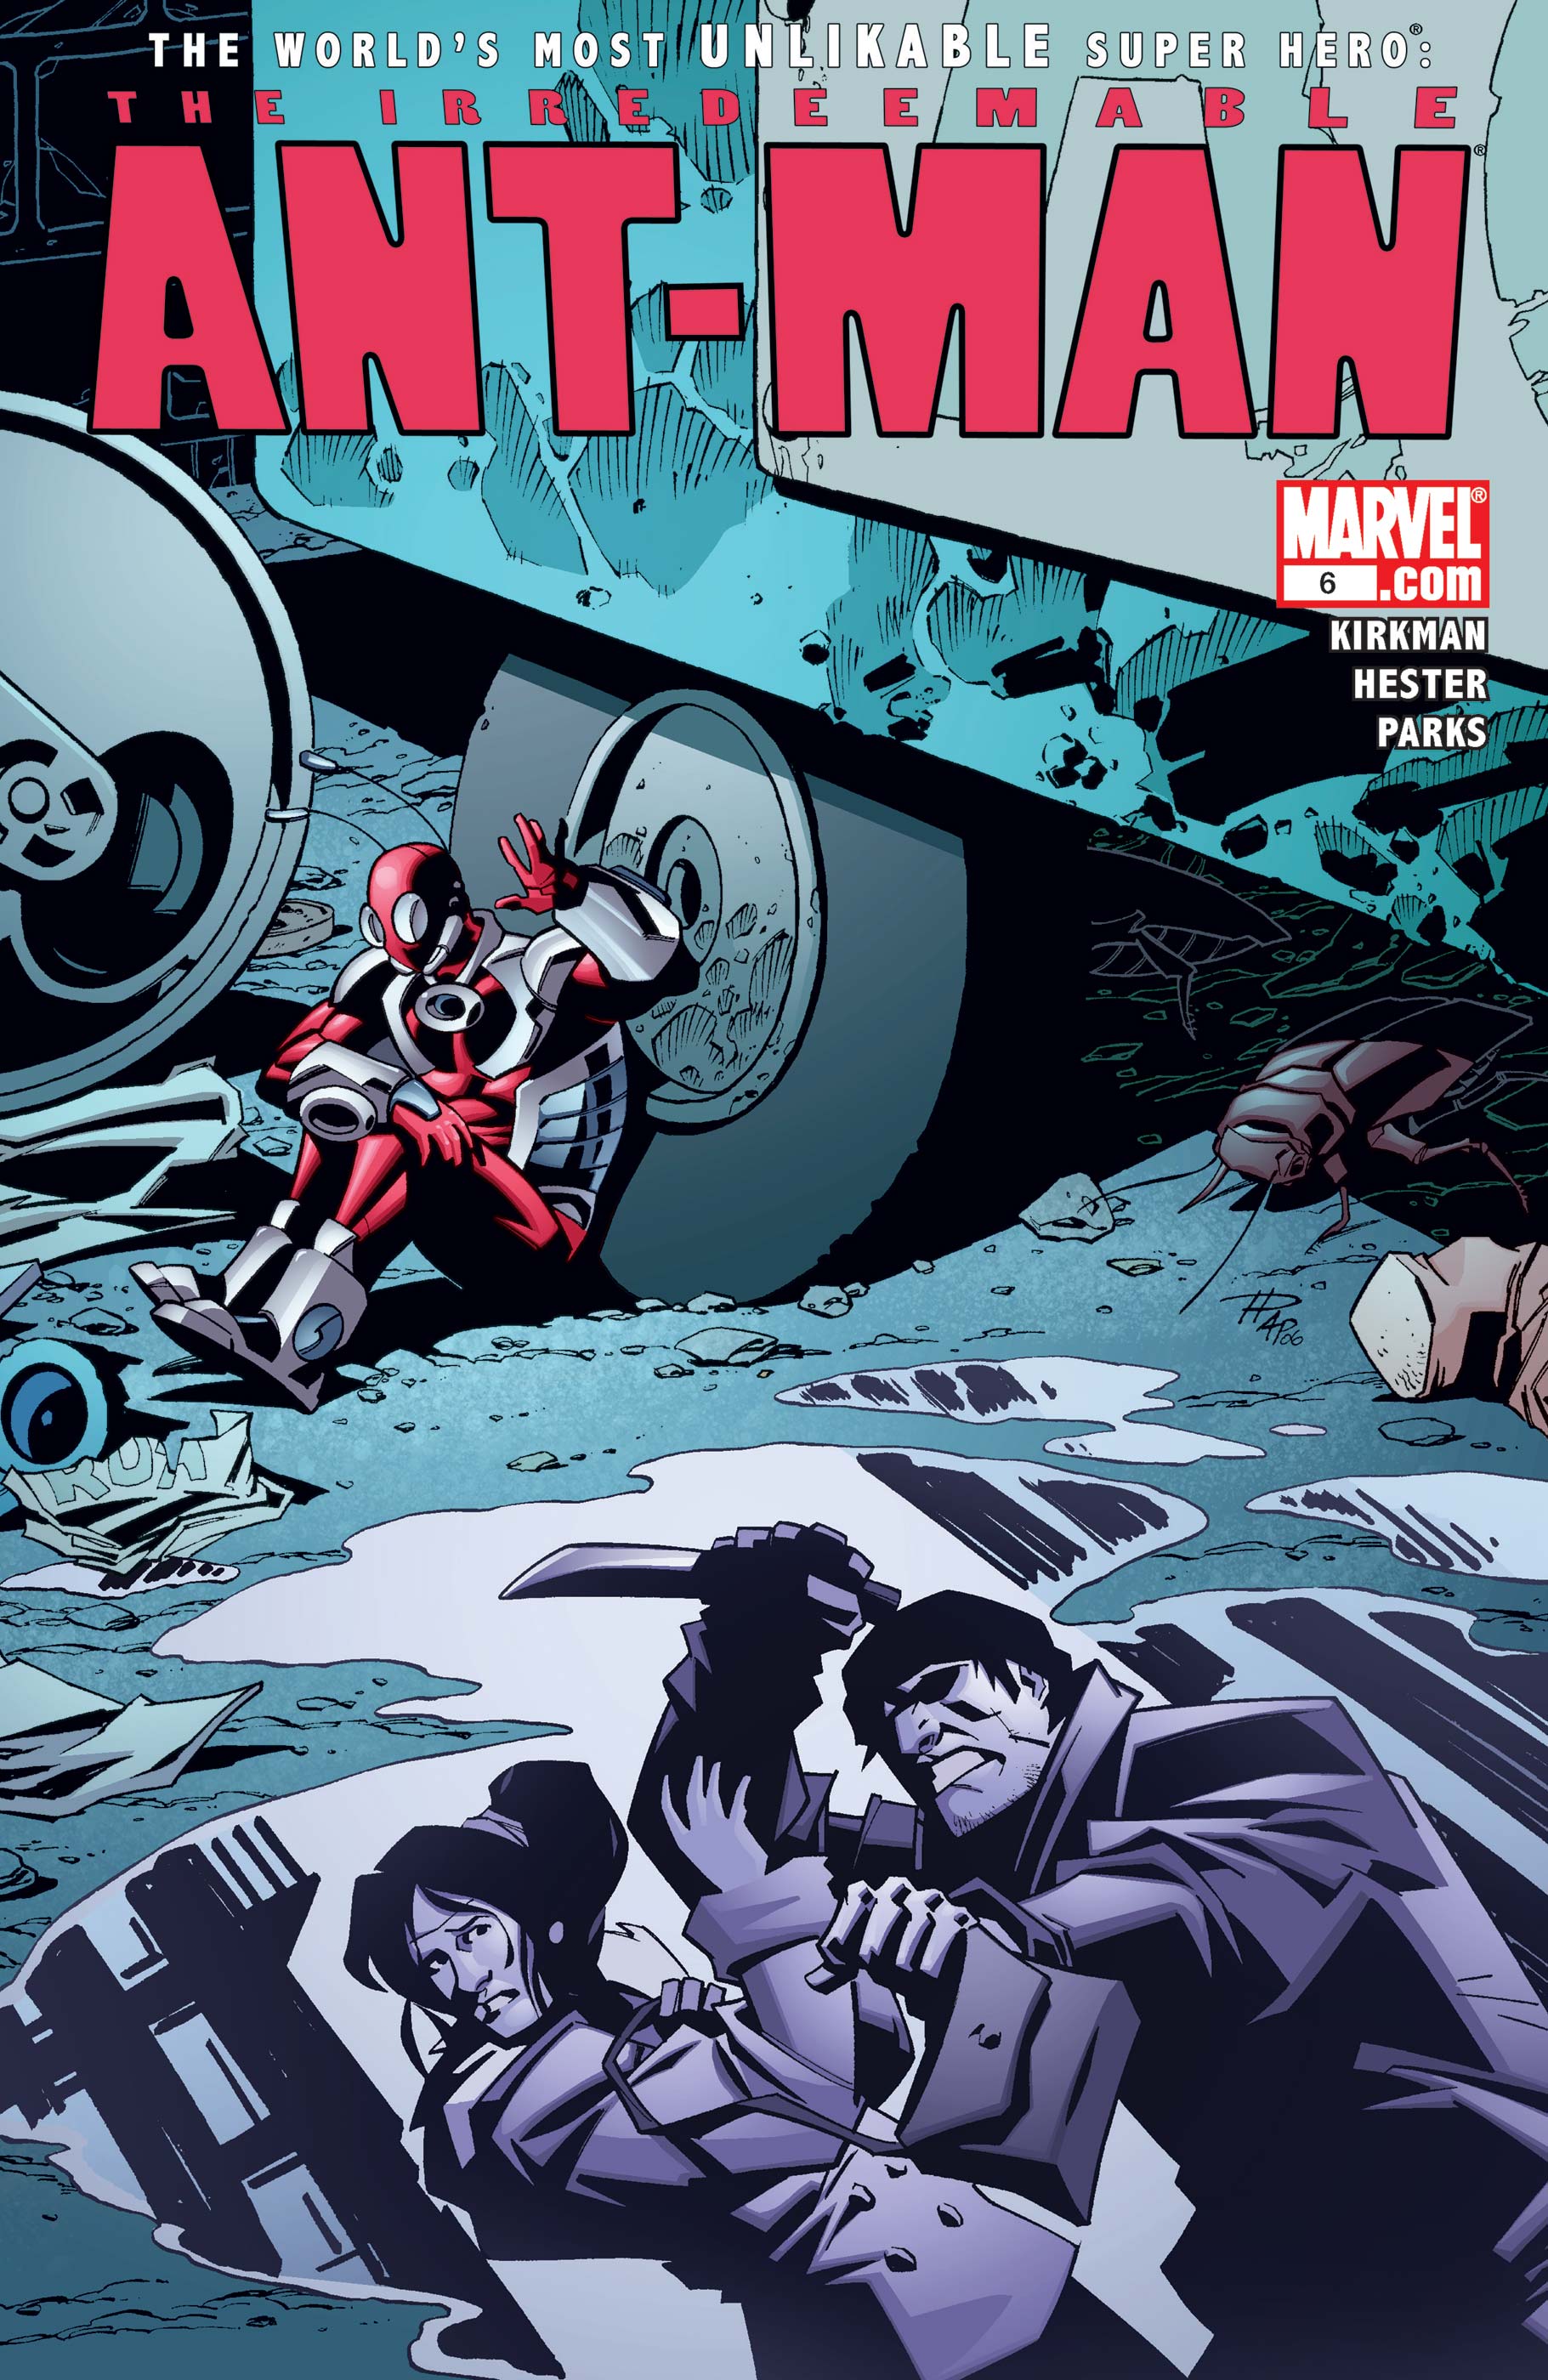 Irredeemable Ant-Man (2006) #6